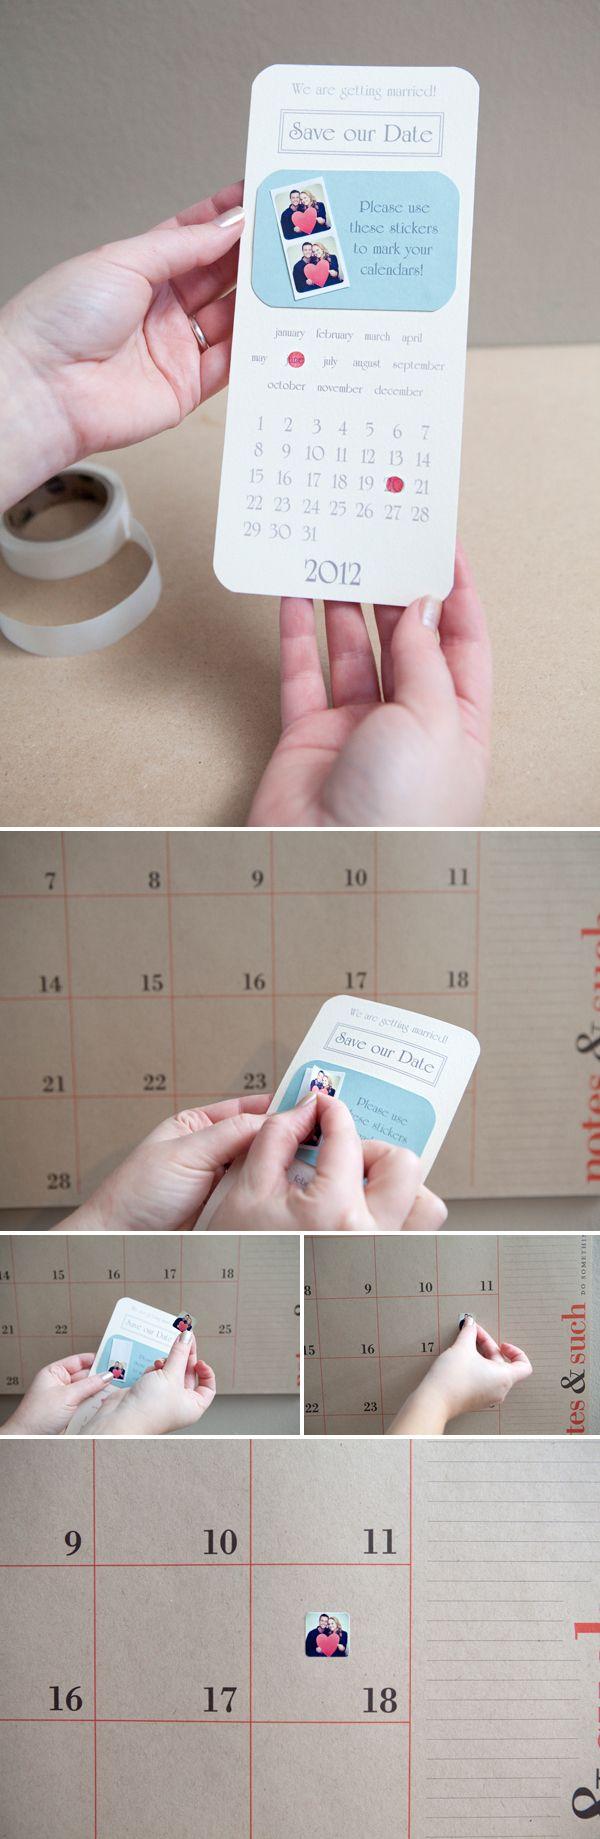 Wedding - How To Make Super Cute DIY Instagram Save The Date Invitations!